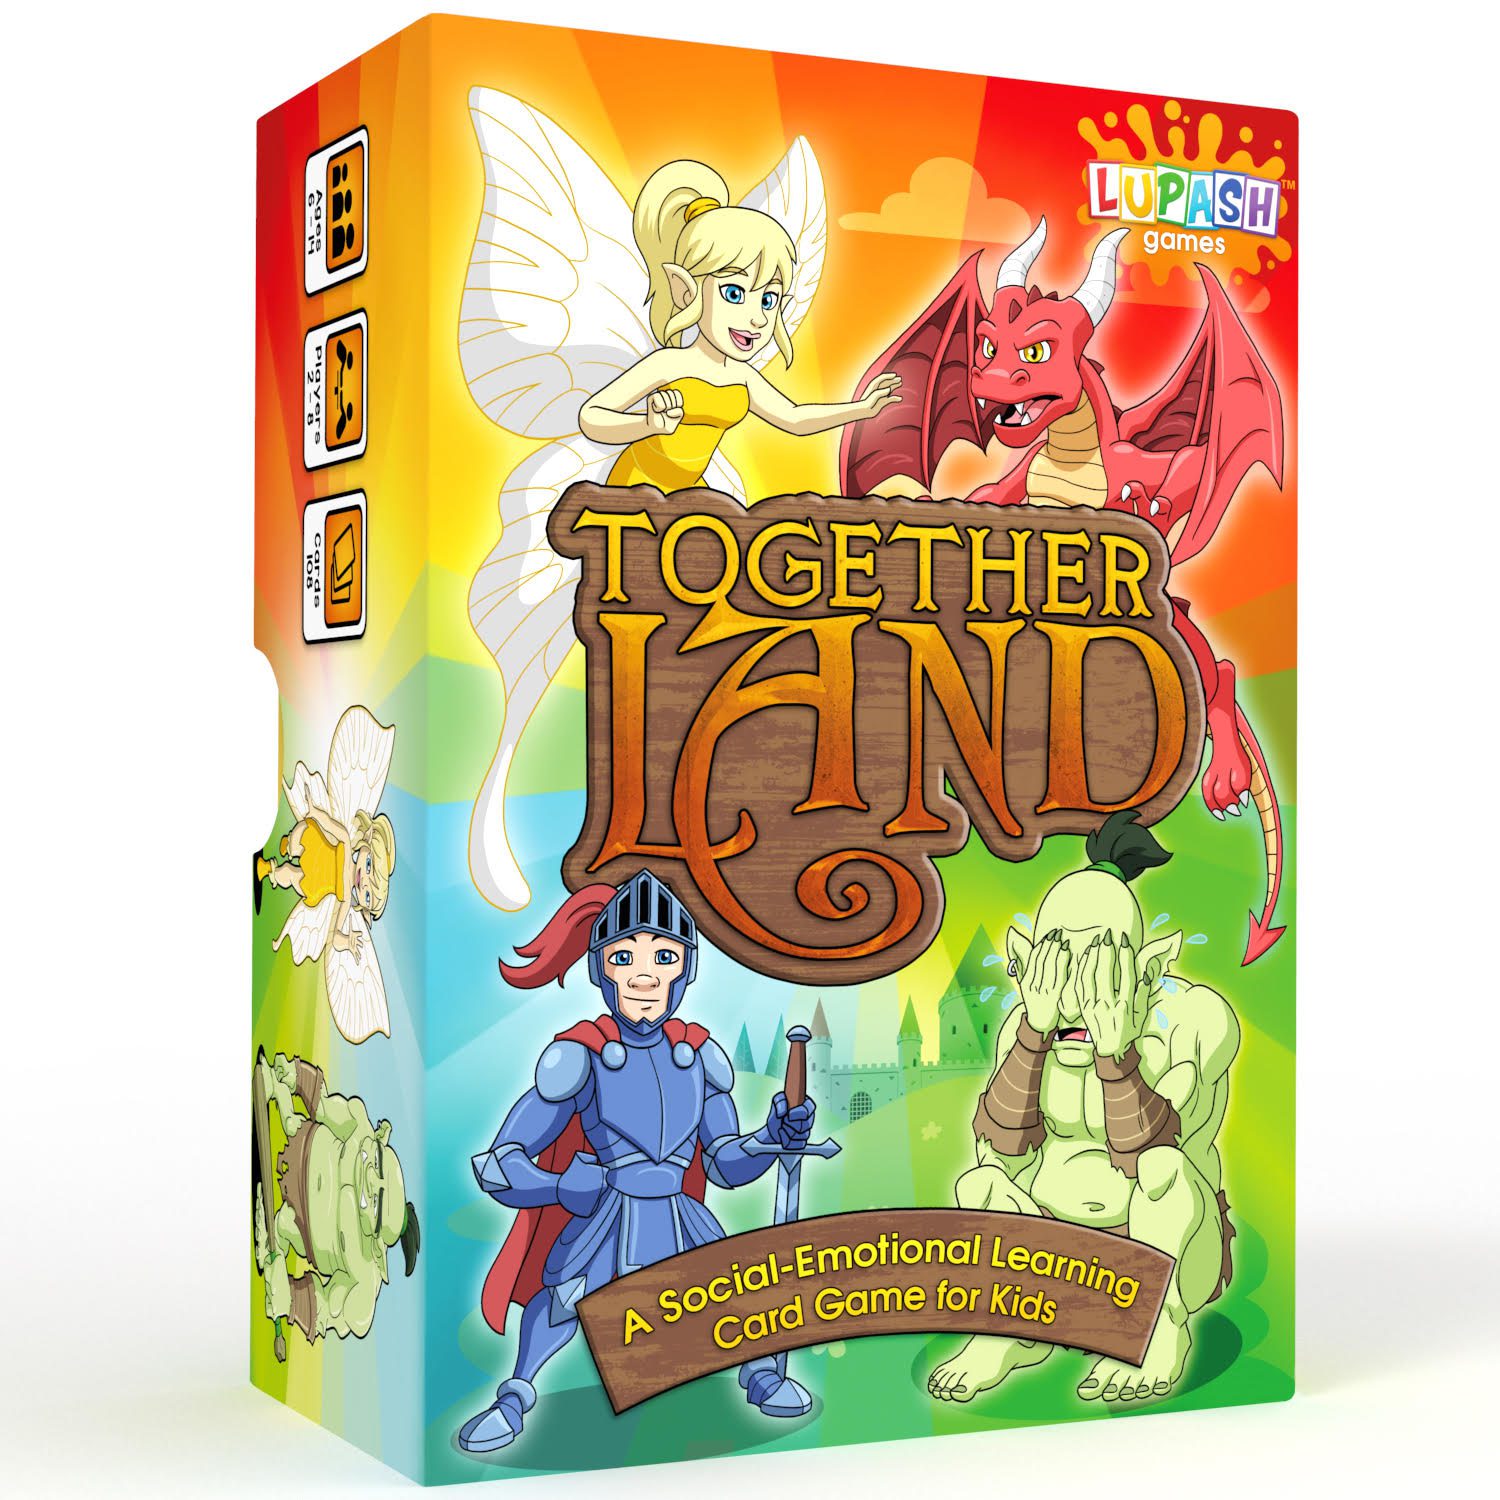 Togetherland Therapy Card Game for Kids - Develop Social Skills and Emotional Control - Perfect for Counselors Groups and Families - Helps with ADHD, Low Self-Esteem Impulse Anger Regulation and More
